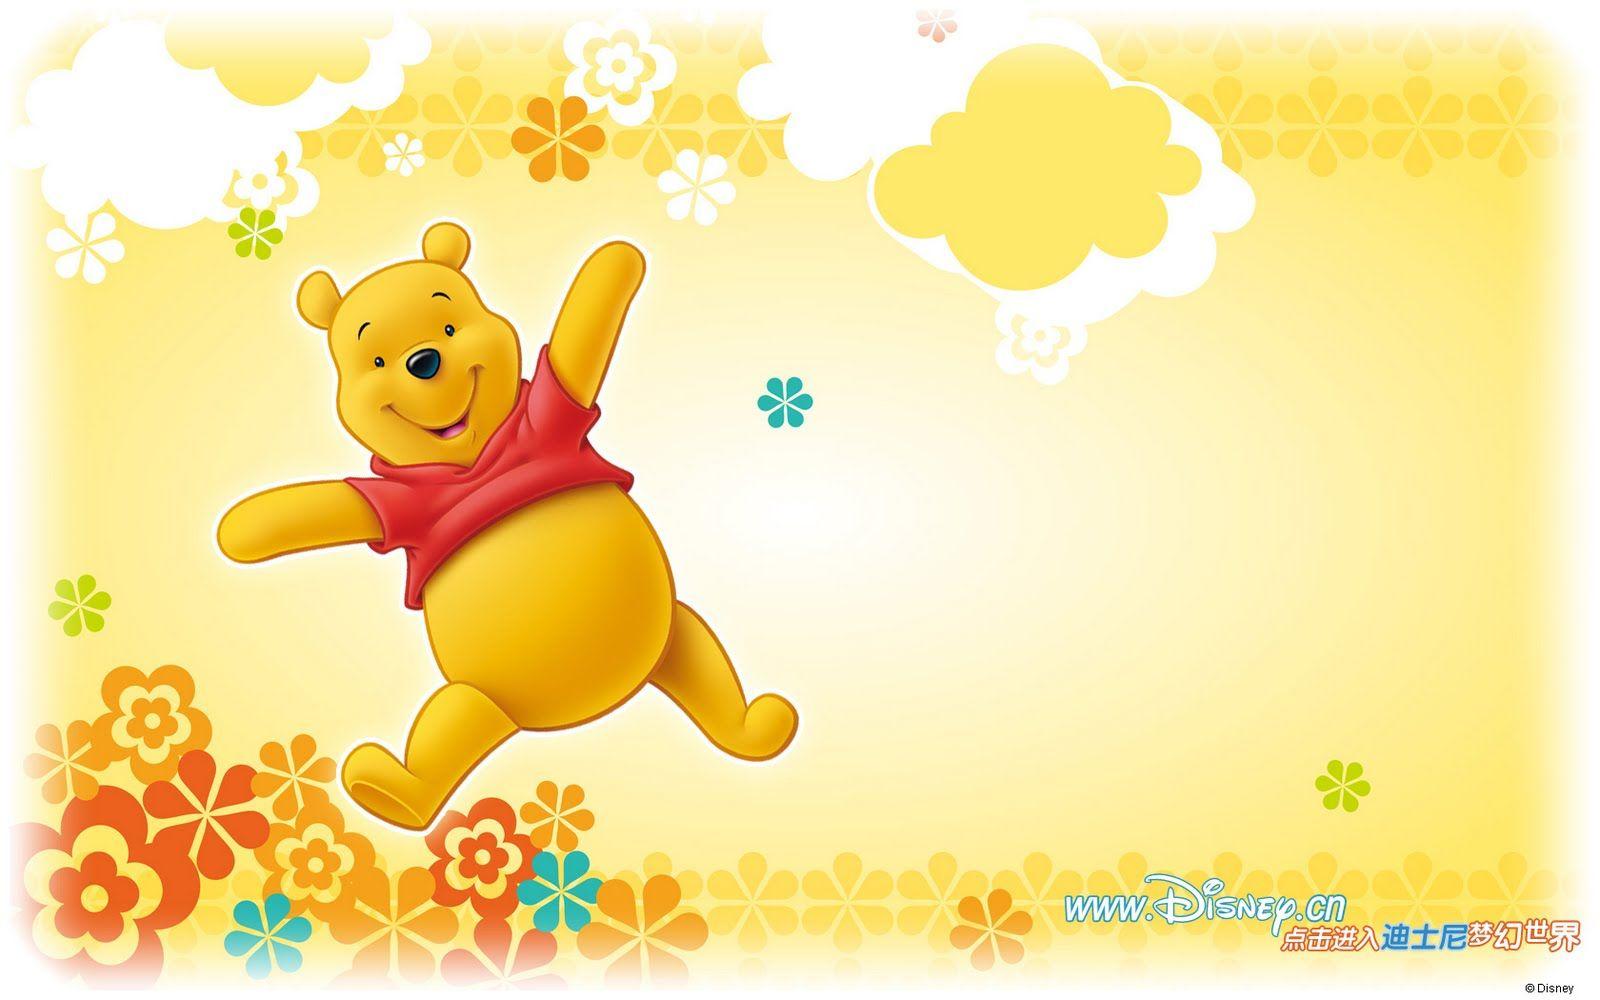 Winnie the Pooh and Friends Wallpaper HD For Mobile